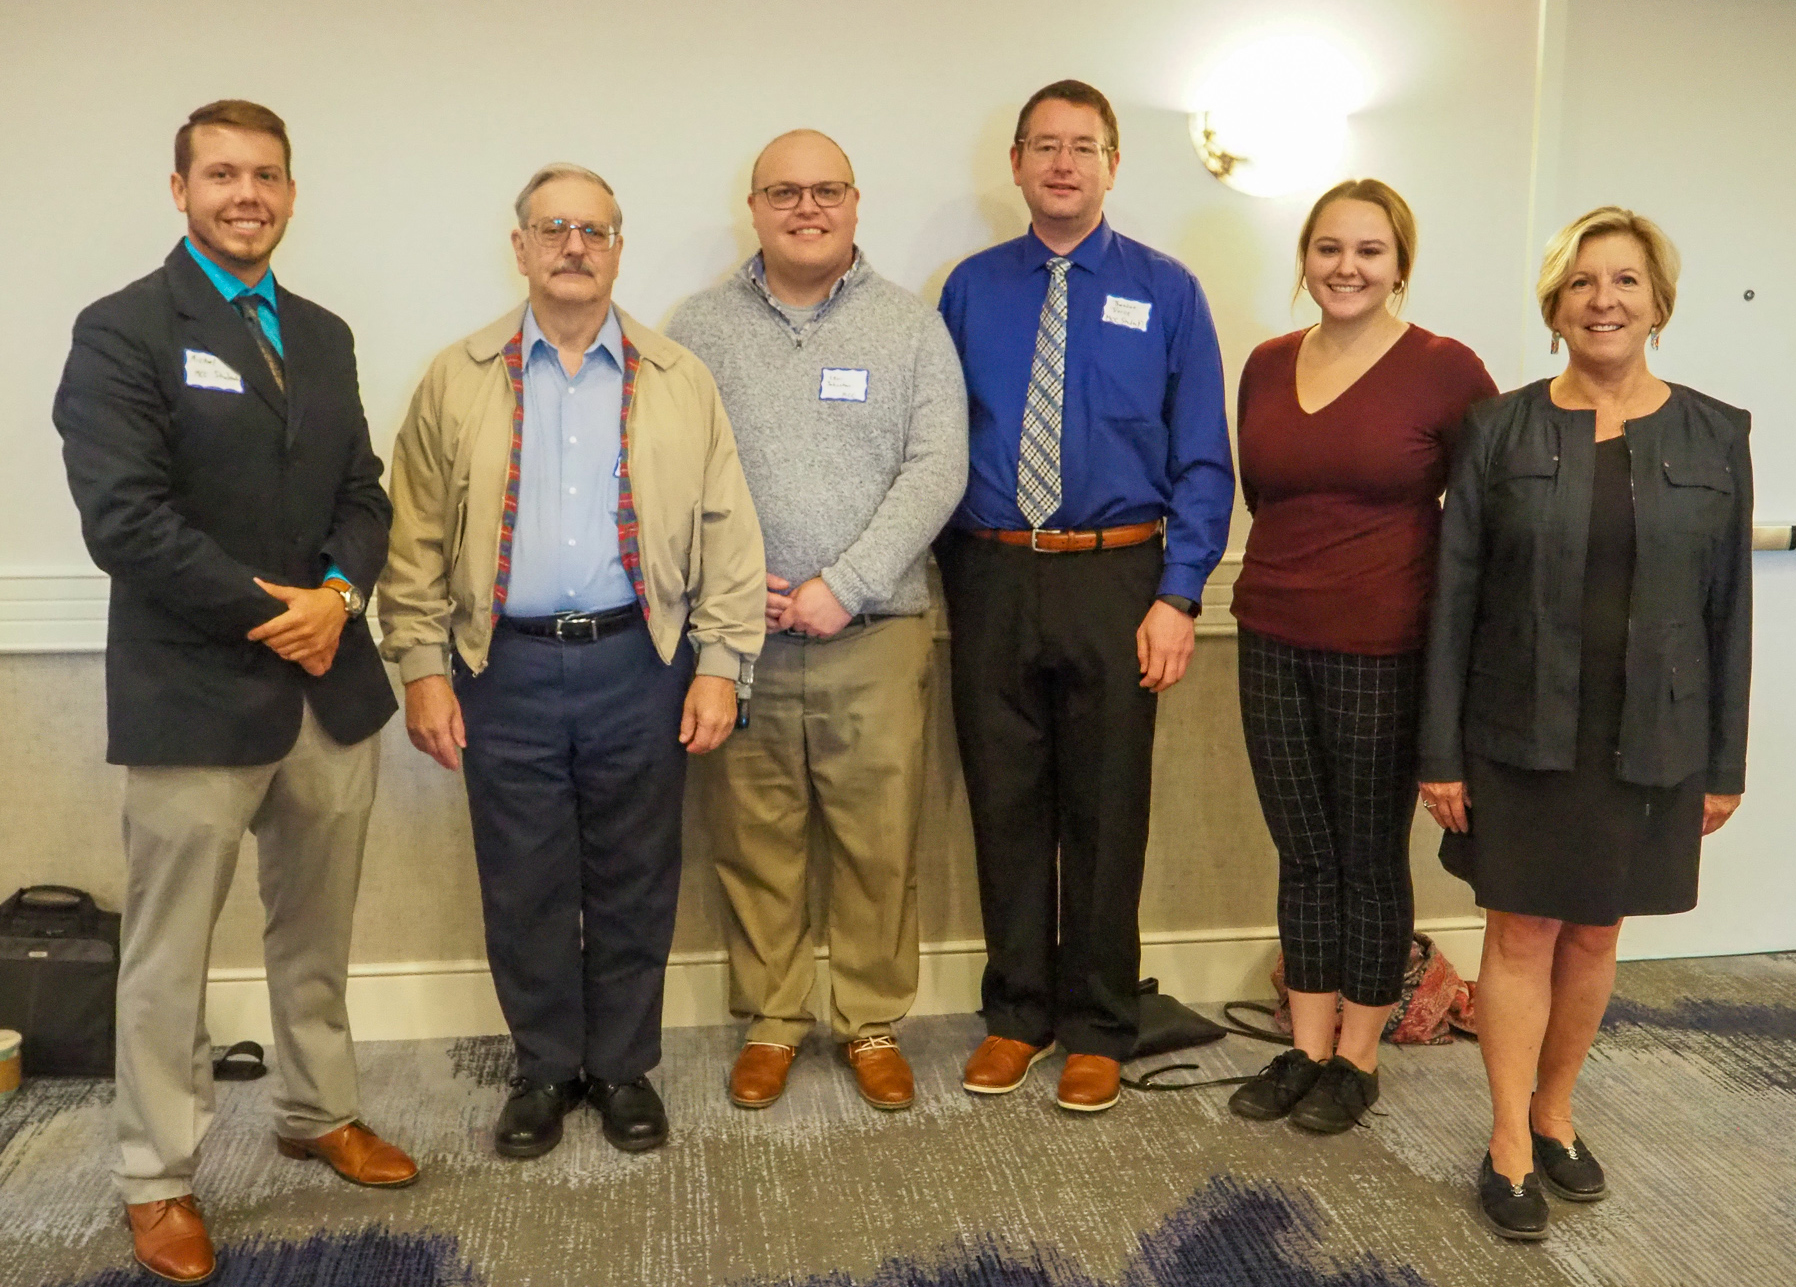 Pictured with Lakeshore Chamber of Commerce President Cindy Larsen (far right) are MCC students (left to right) Kim Herron, Michael Walukonis, Levi Johnson, Theodore Trerice and Isabella Freeland.